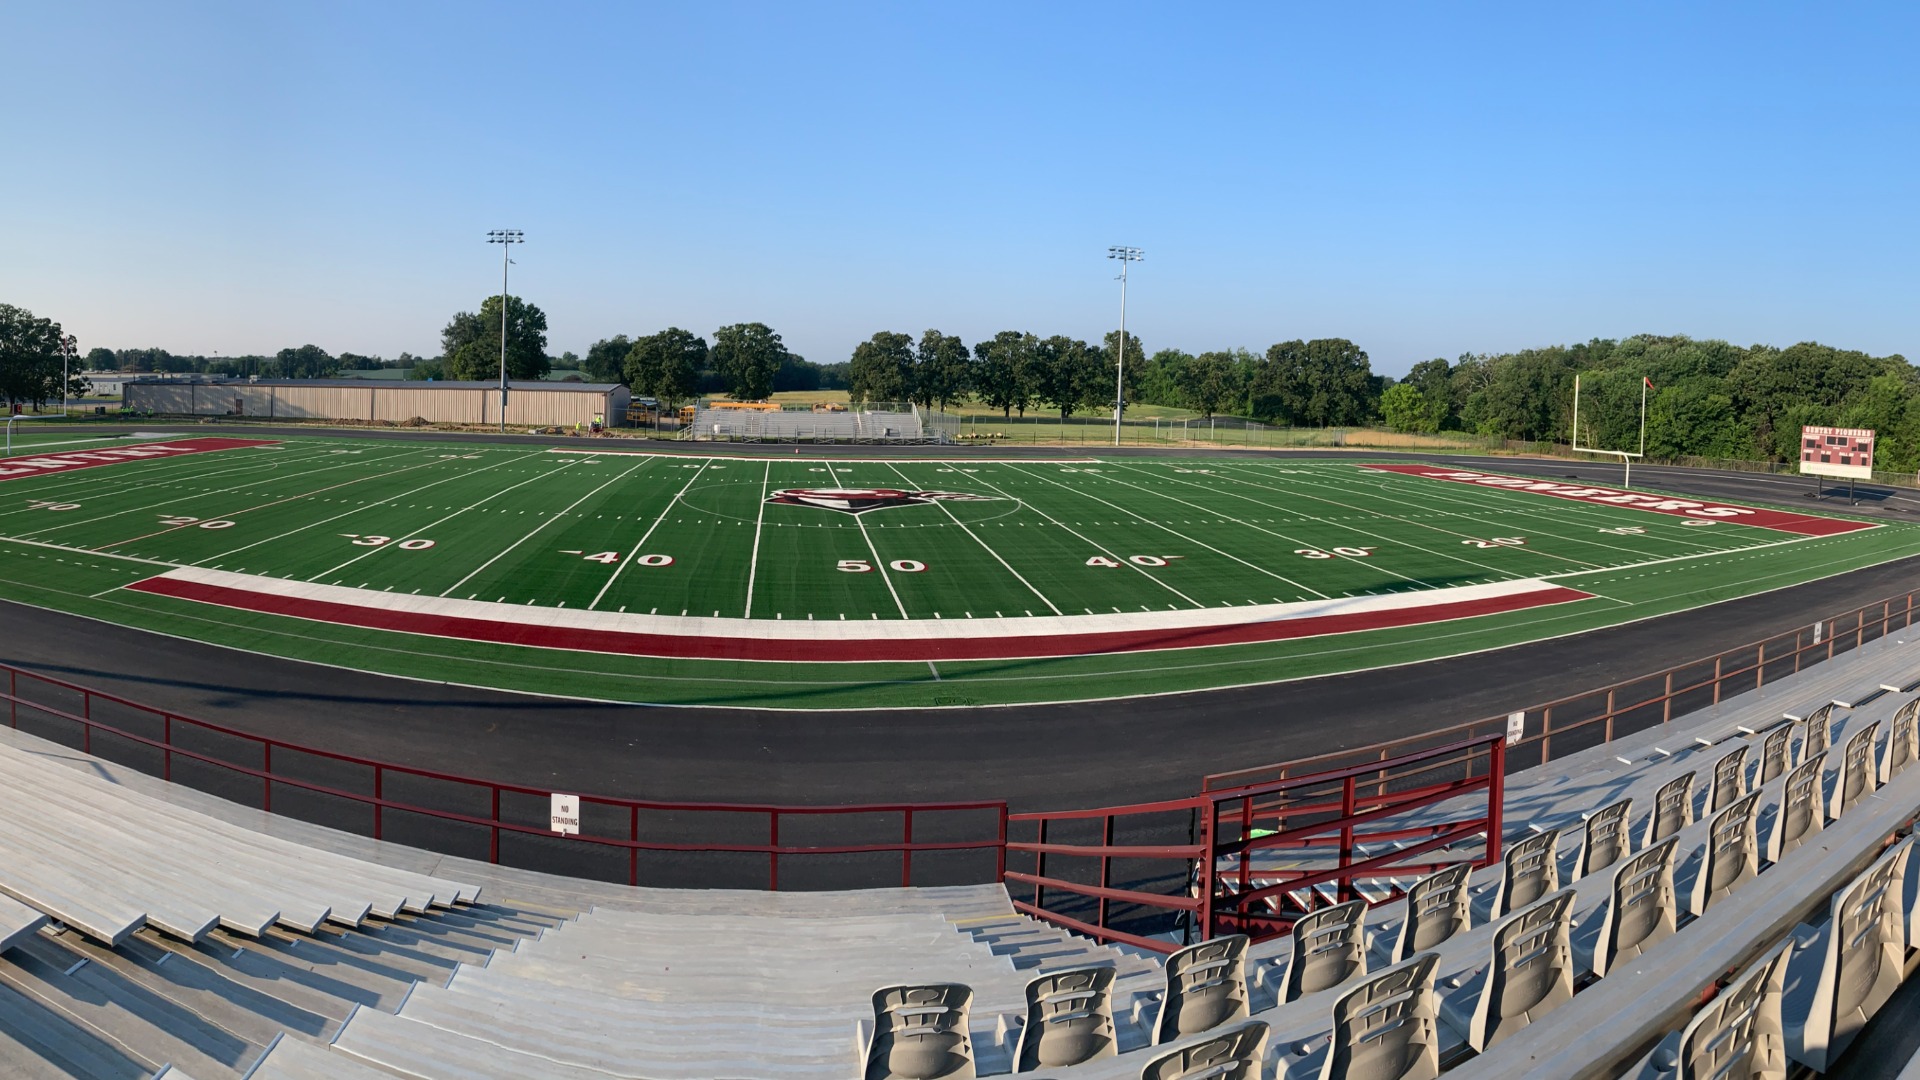 Slide 0 - New Turf Project